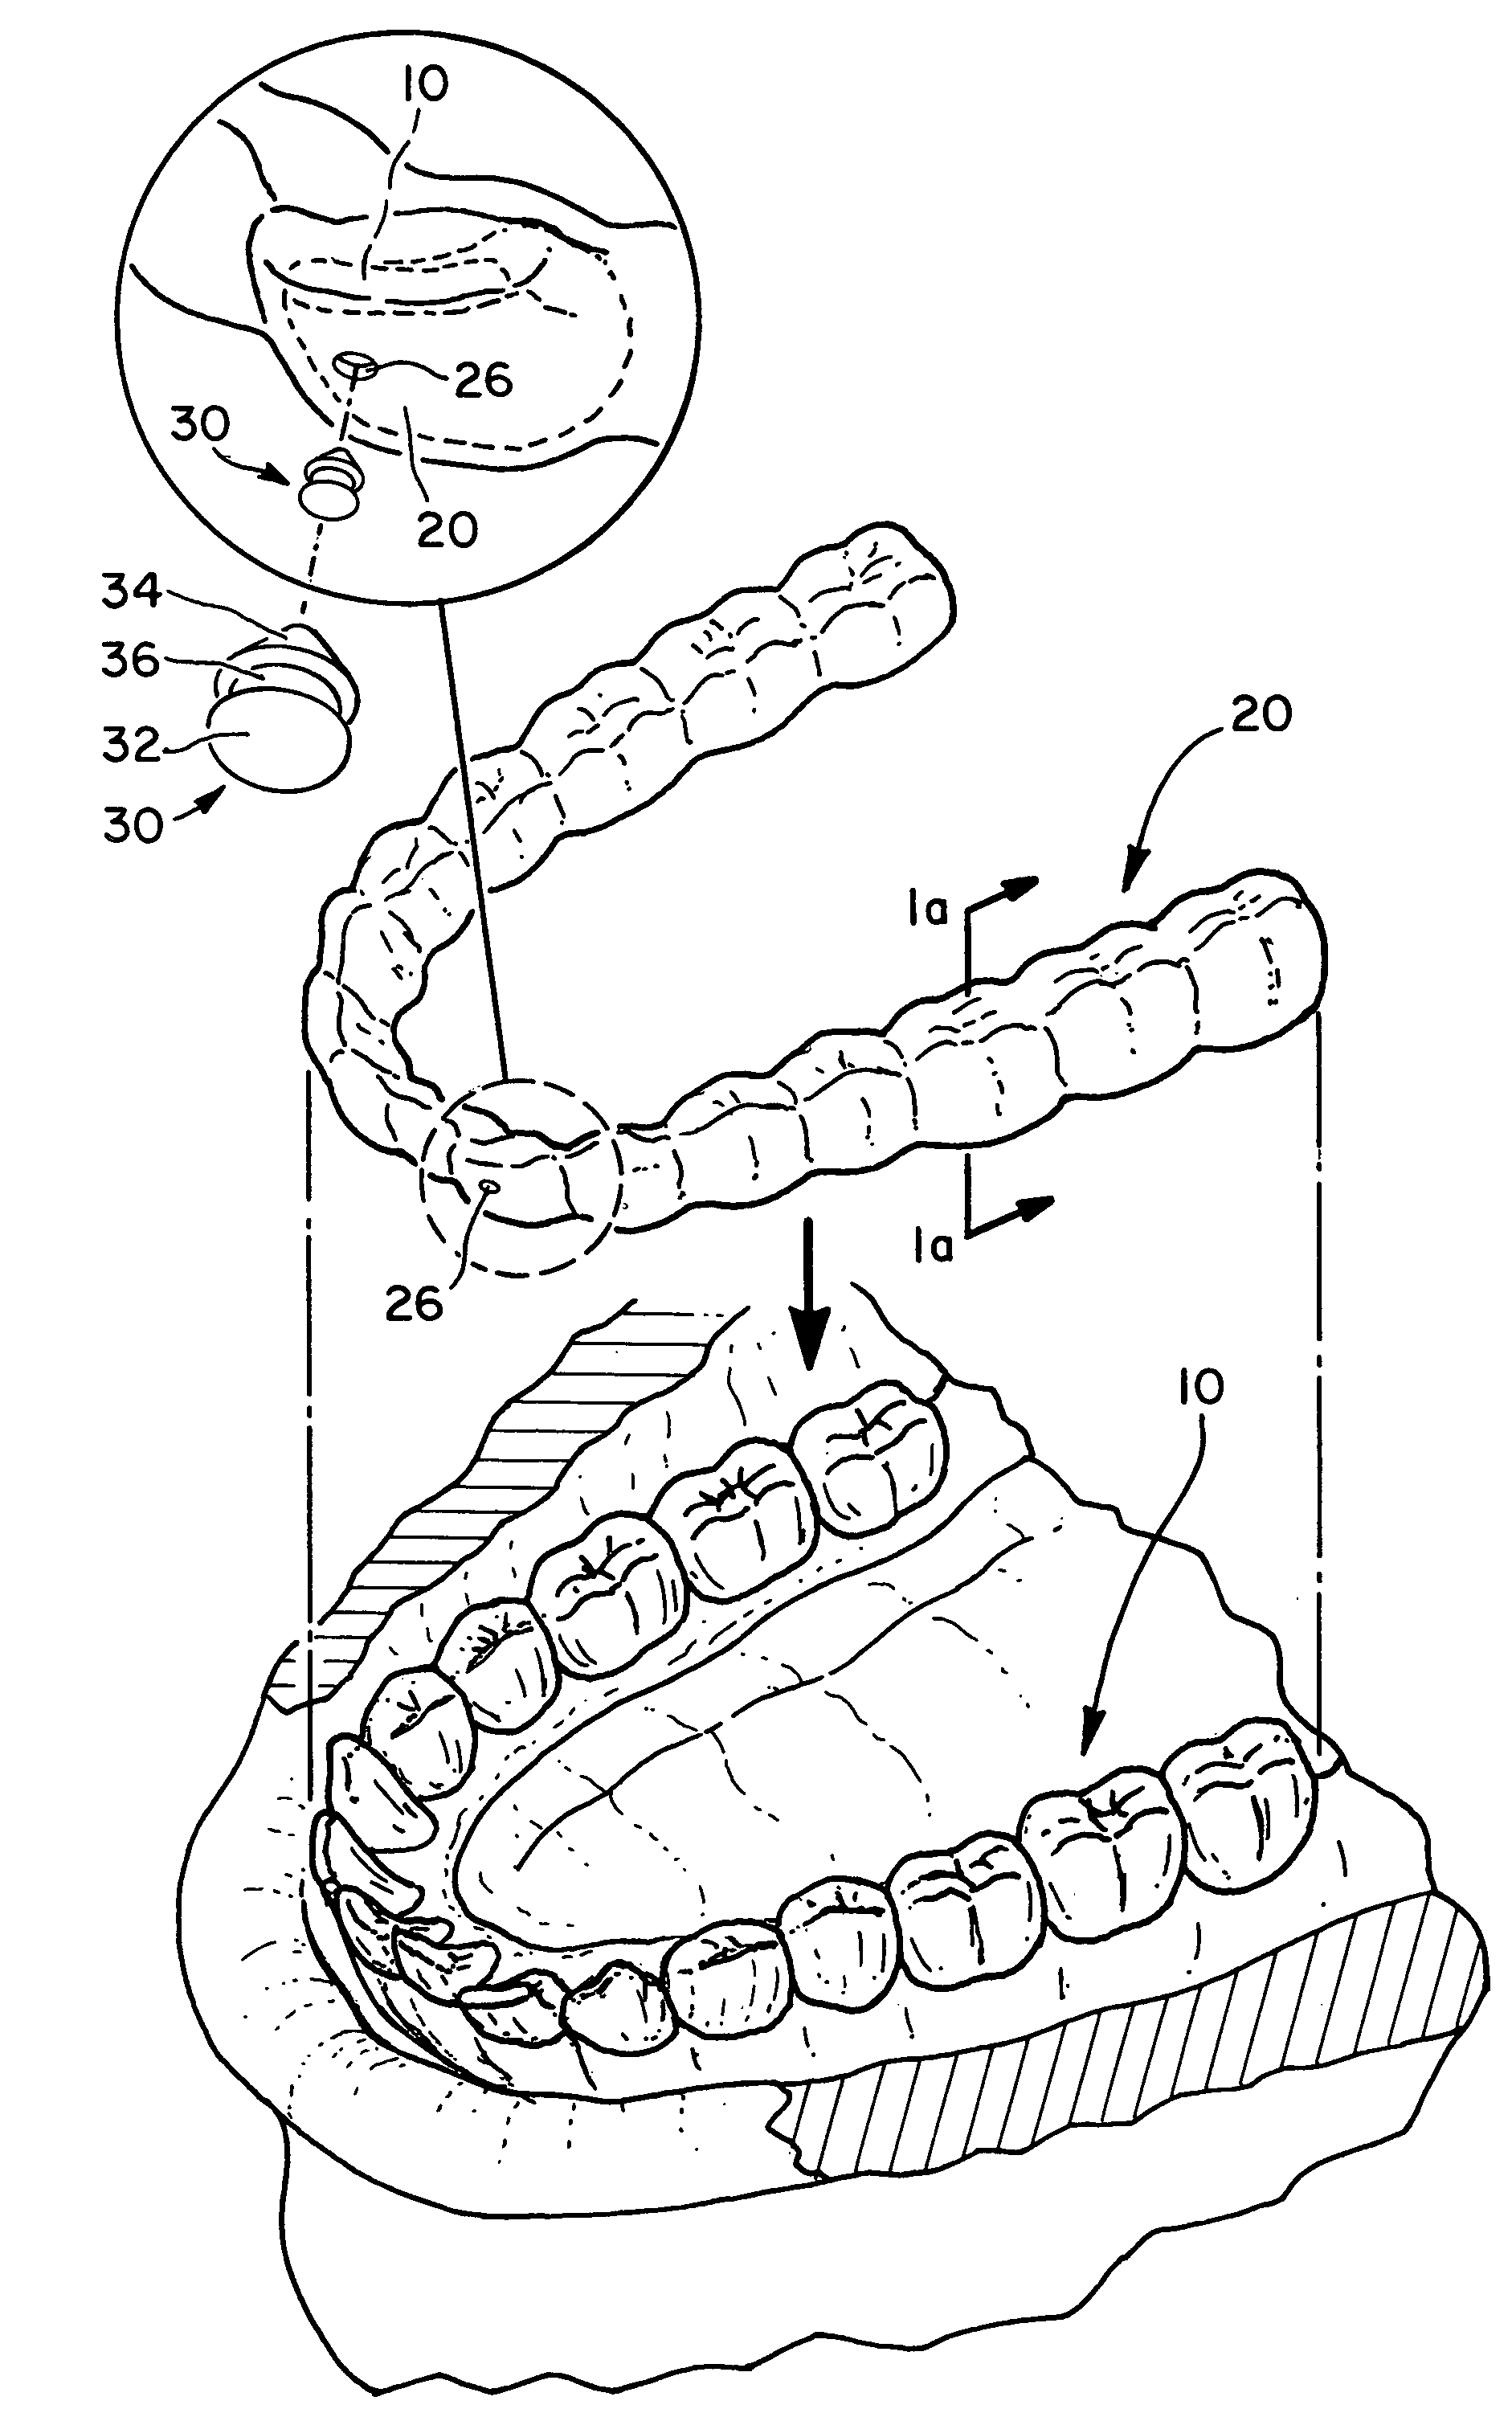 Automated method for producing improved orthodontic aligners